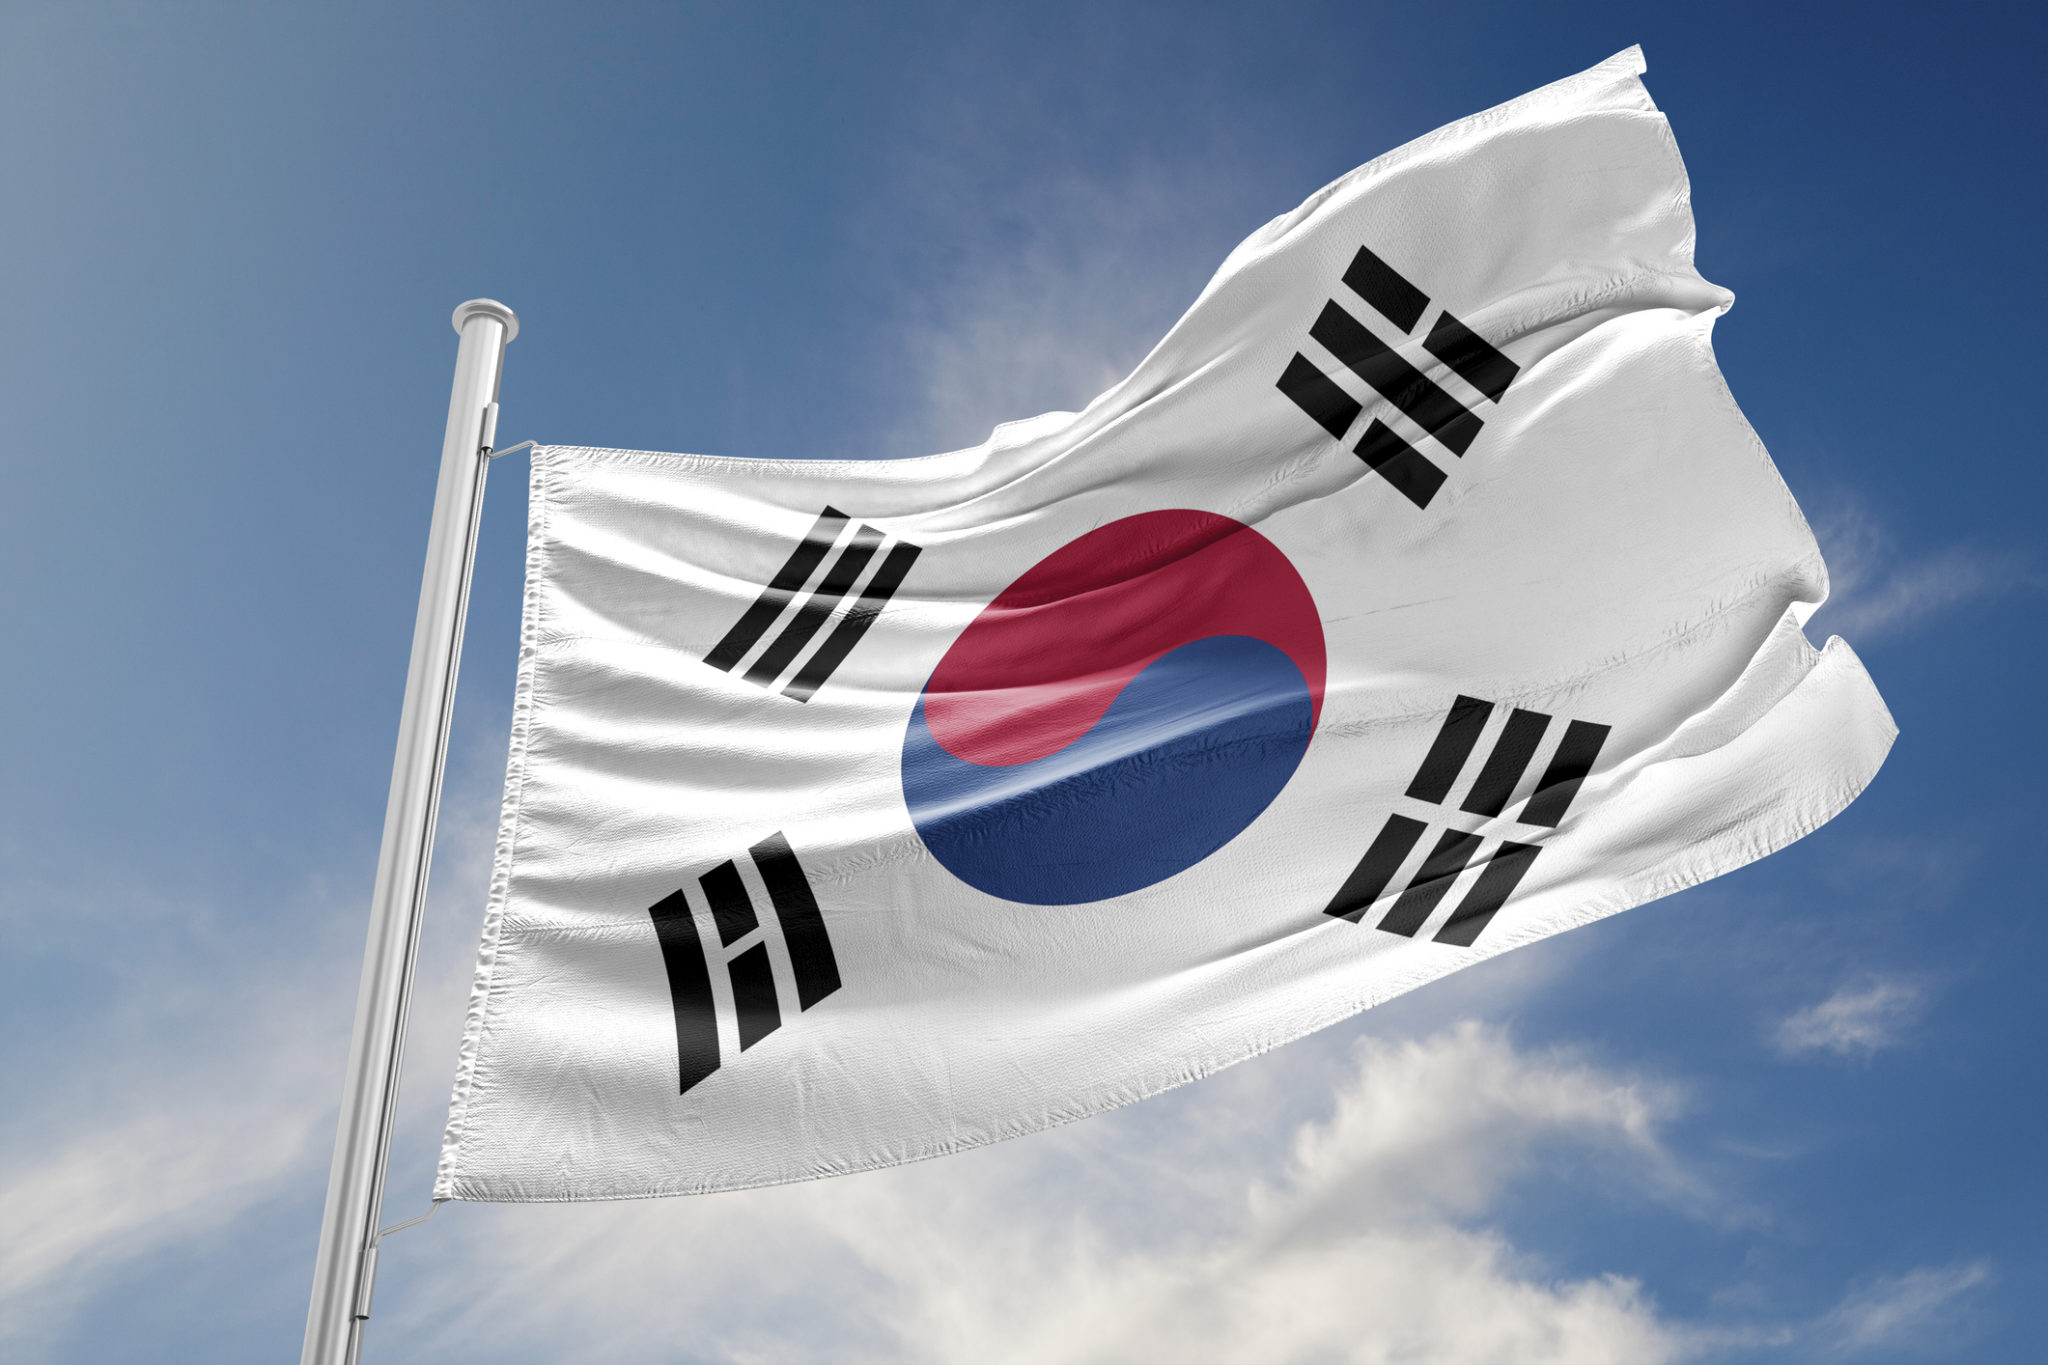 How South Korea’s Election Could Impact U.S. National Security